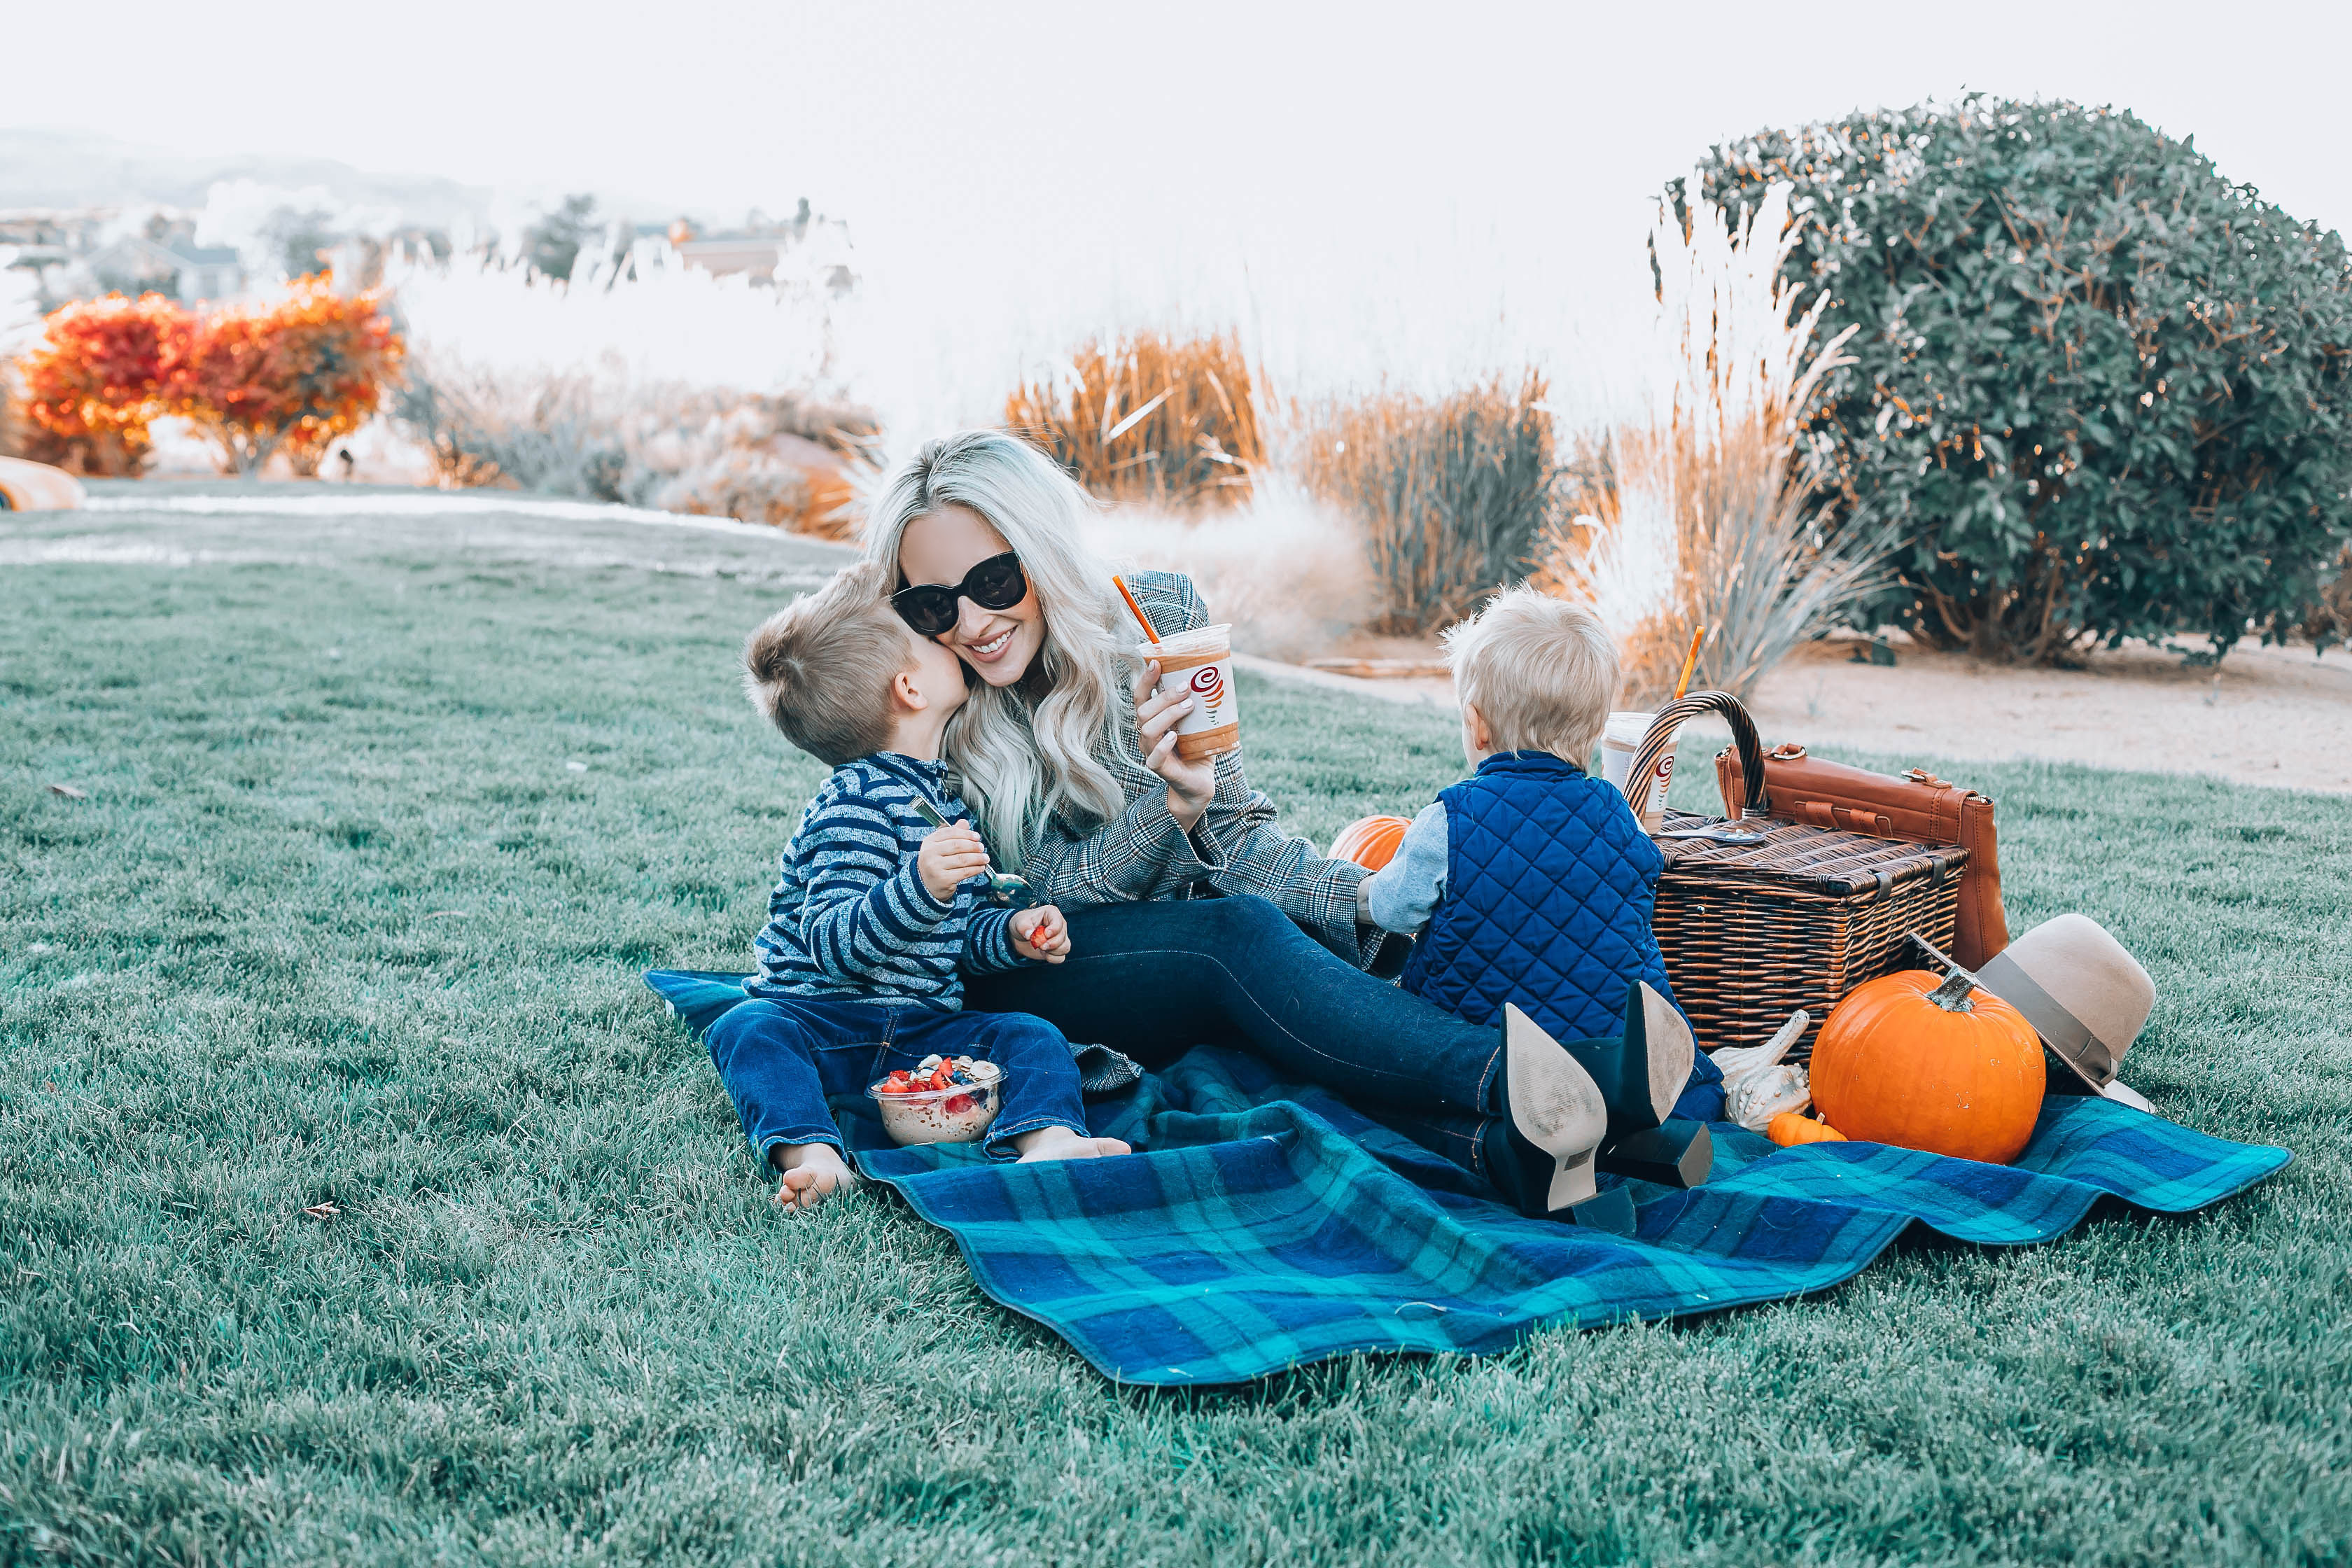 Emily Farren Wieczorek of Two Peas in a Prada talks about her love for Jamba Juice, how it fuels her family on the go, and all their new fall flavors!